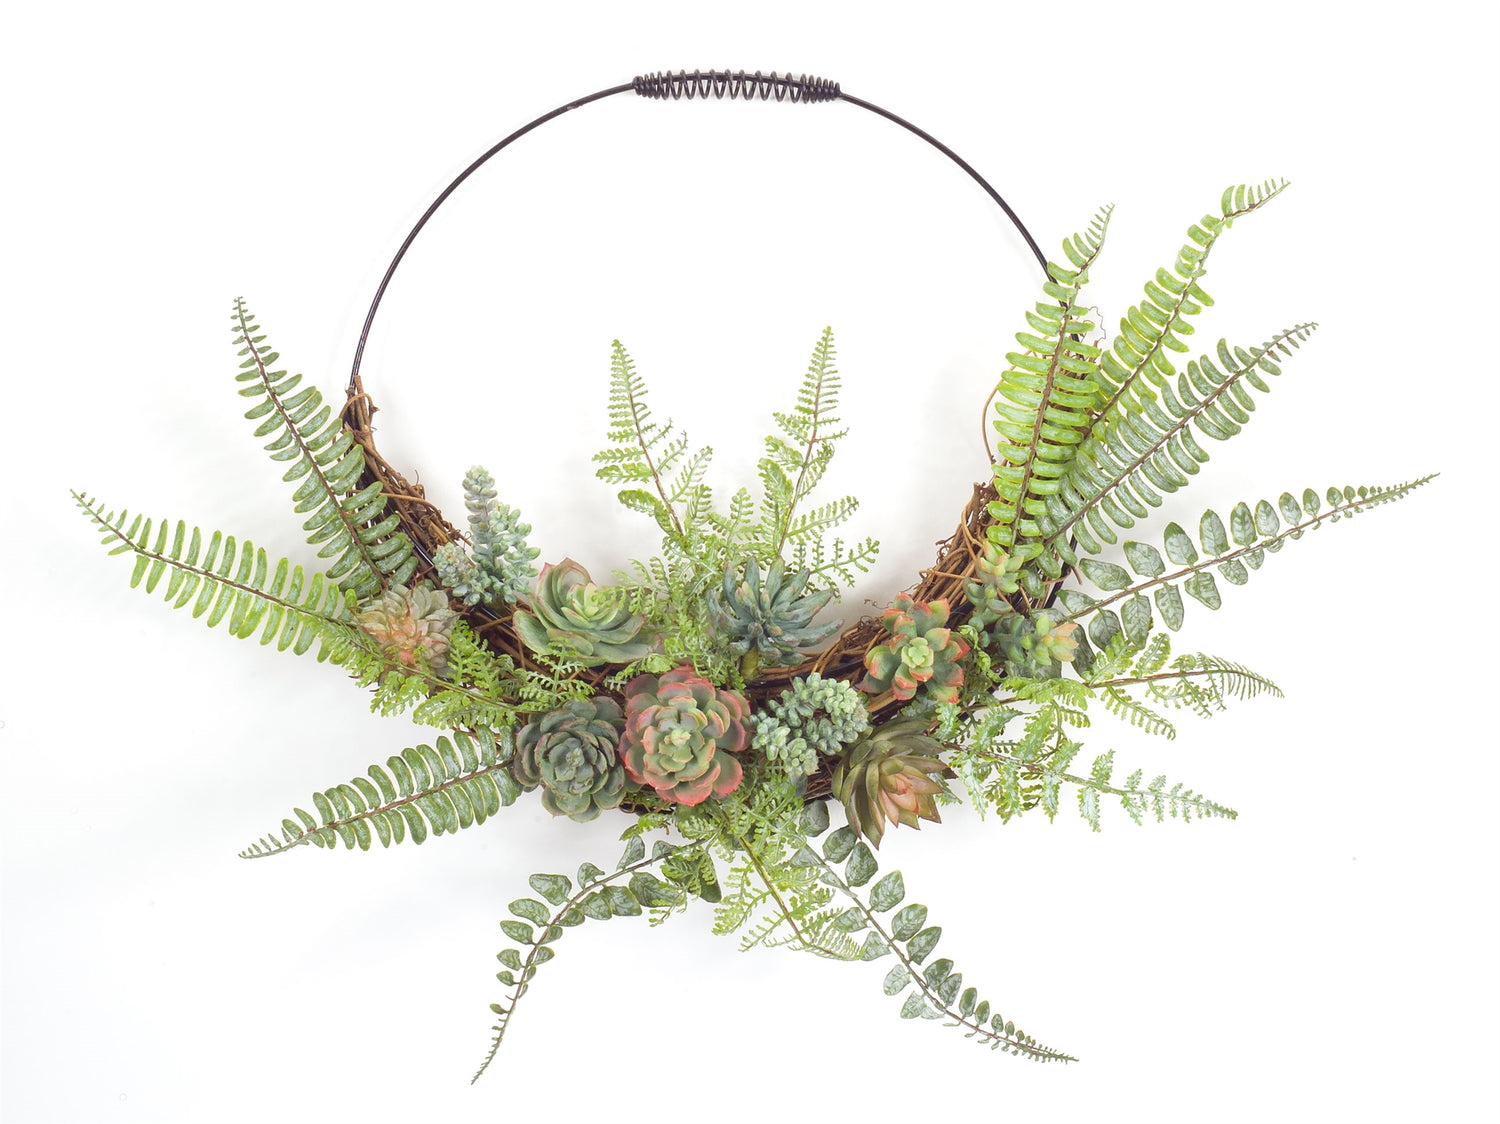 Fern and Succulent Wall D‚àö¬©cor 24.5" x 19.25"H Plastic/Wire